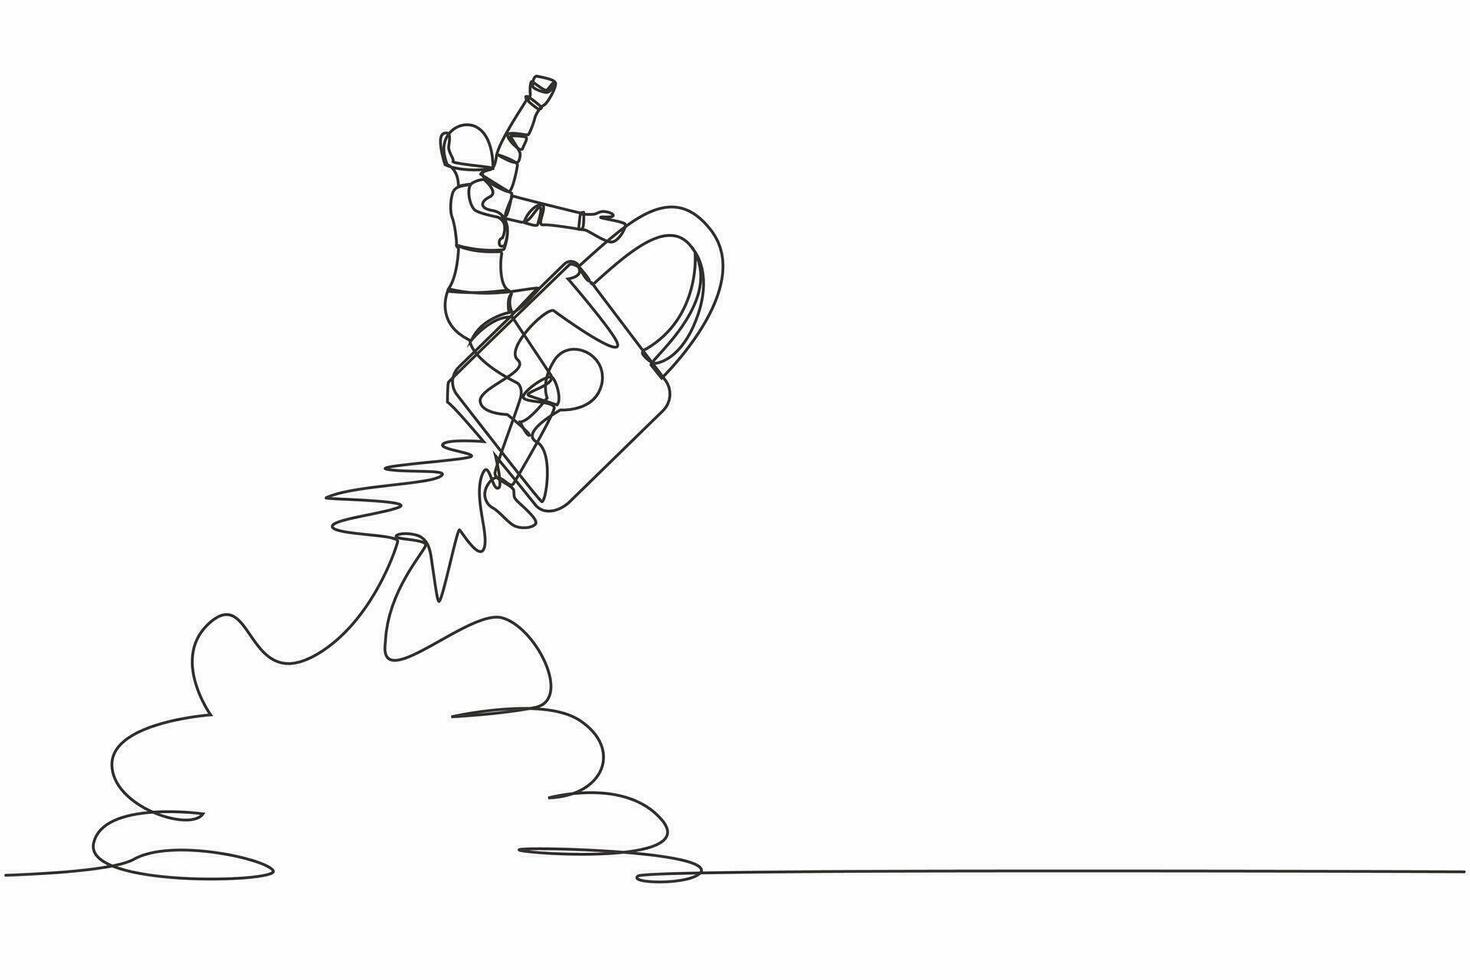 Single one line drawing robot riding padlock rocket flying in sky. Improve tech business security. Robotic artificial intelligence technology. Continuous line draw design graphic vector illustration